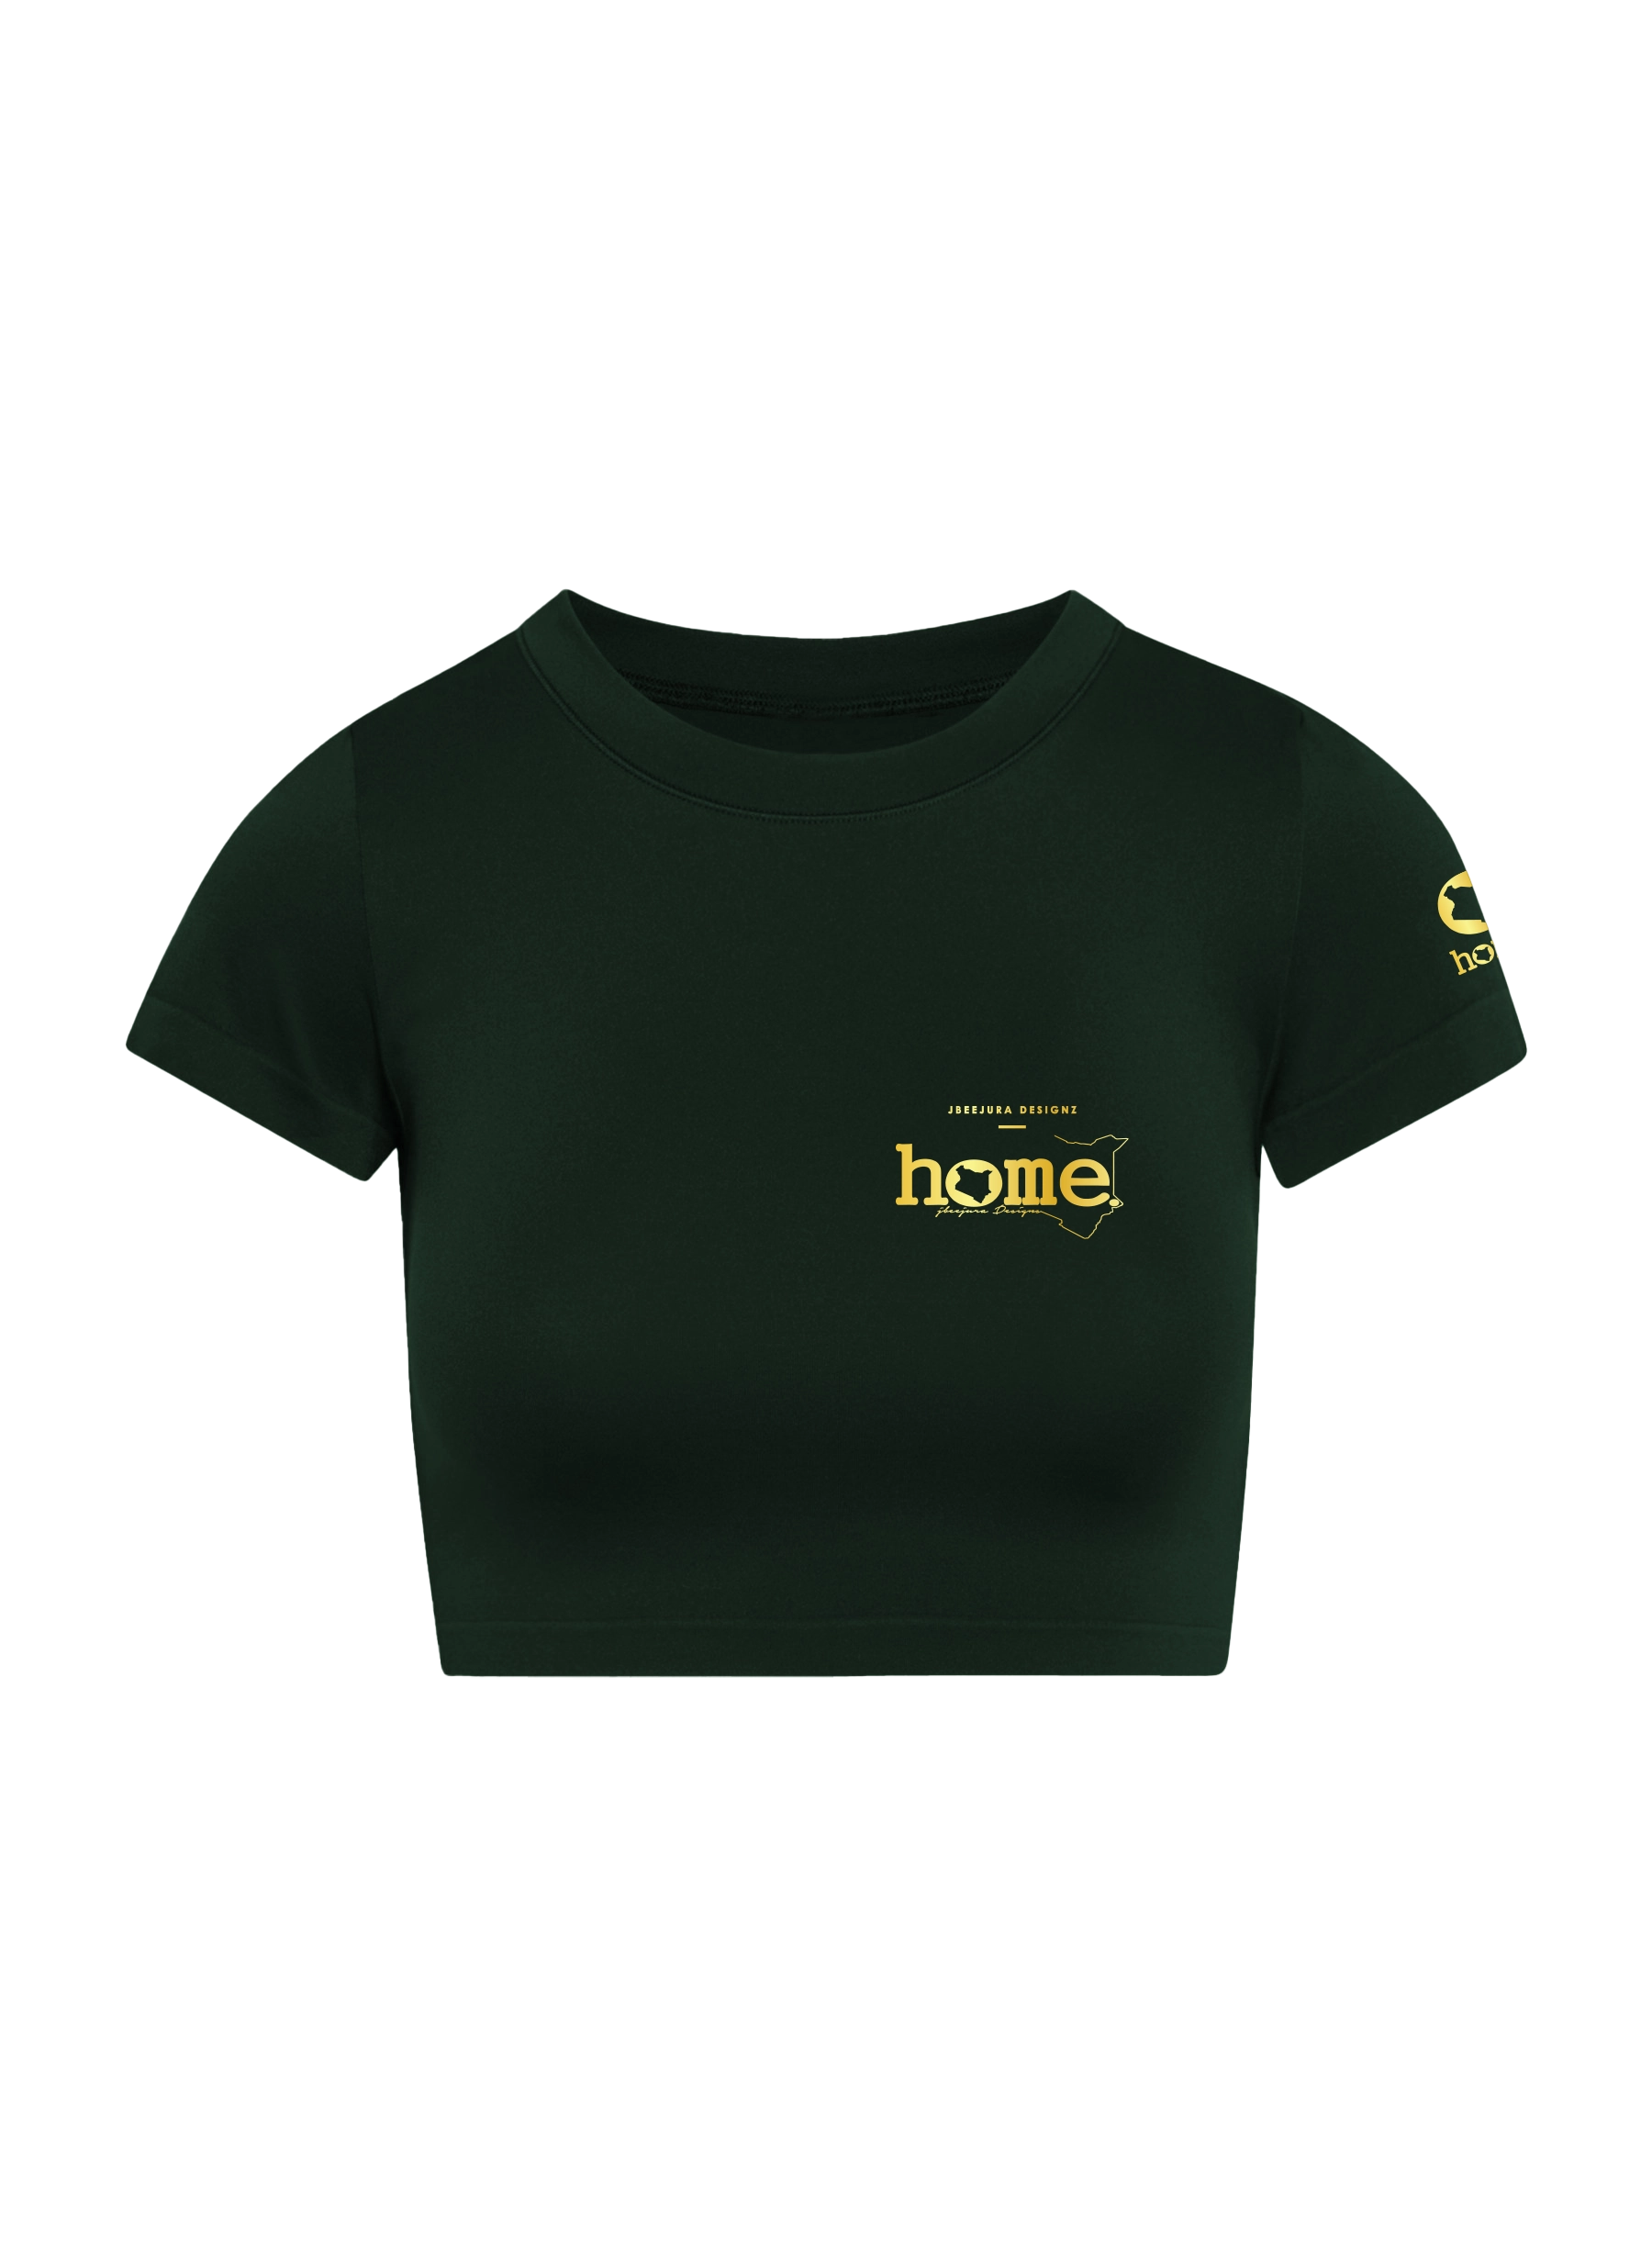 home_254 SHORT SLEEVED FOREST GREEN CROPPED ARIA TEE WITH A GOLD 3D WORDS PRINT 